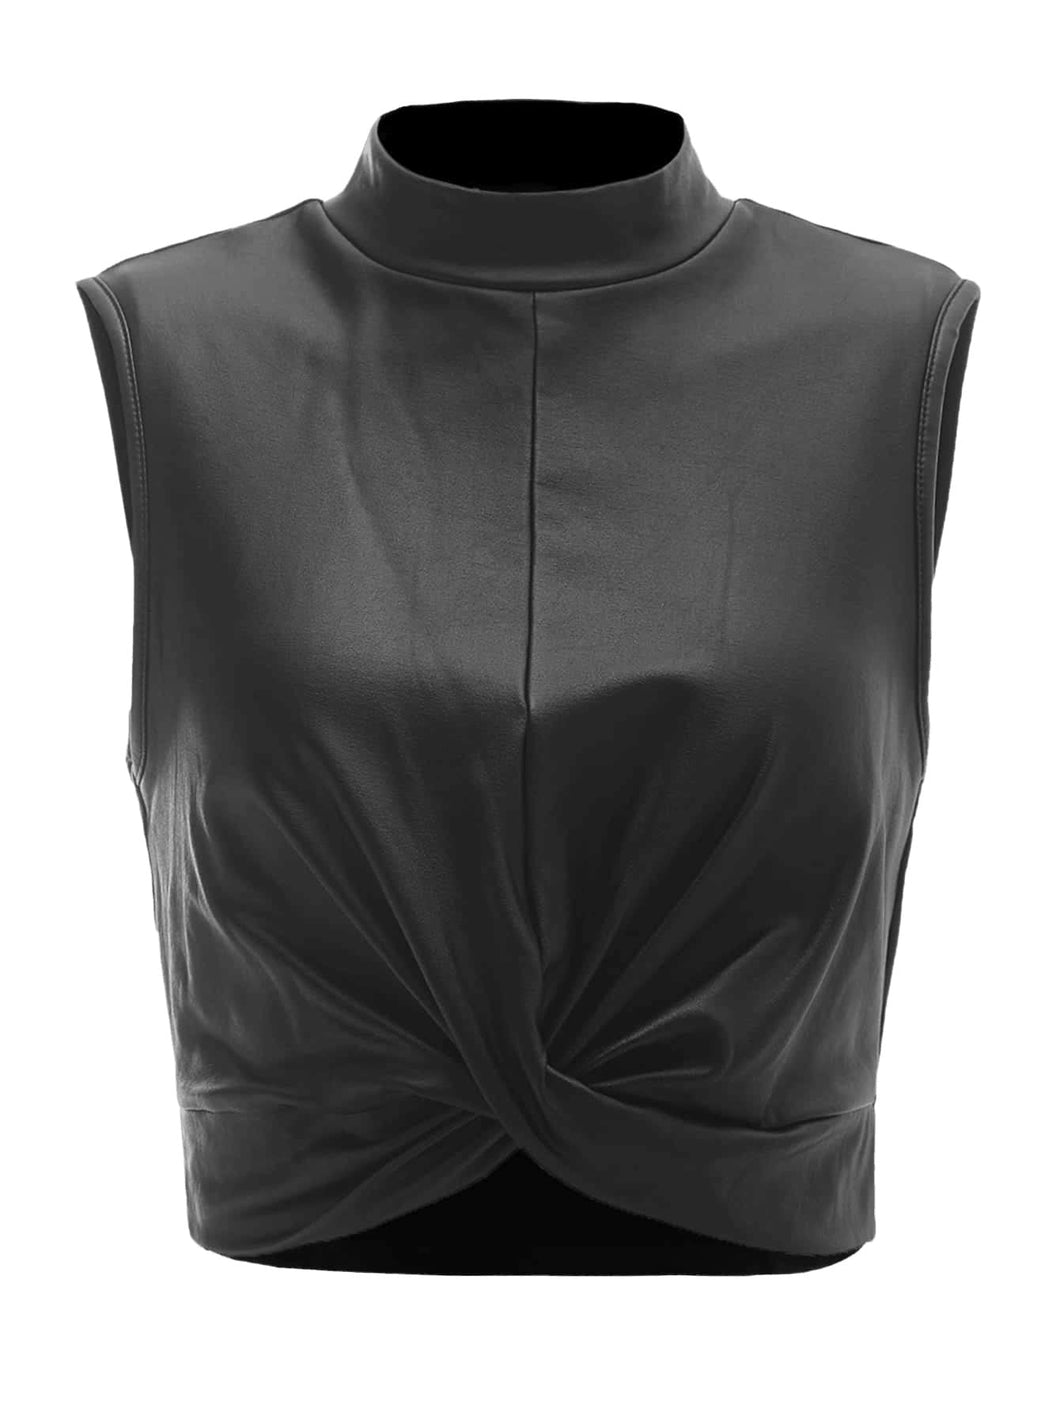 Black Faux Leather Mock Neck Sleeveless Crop Top